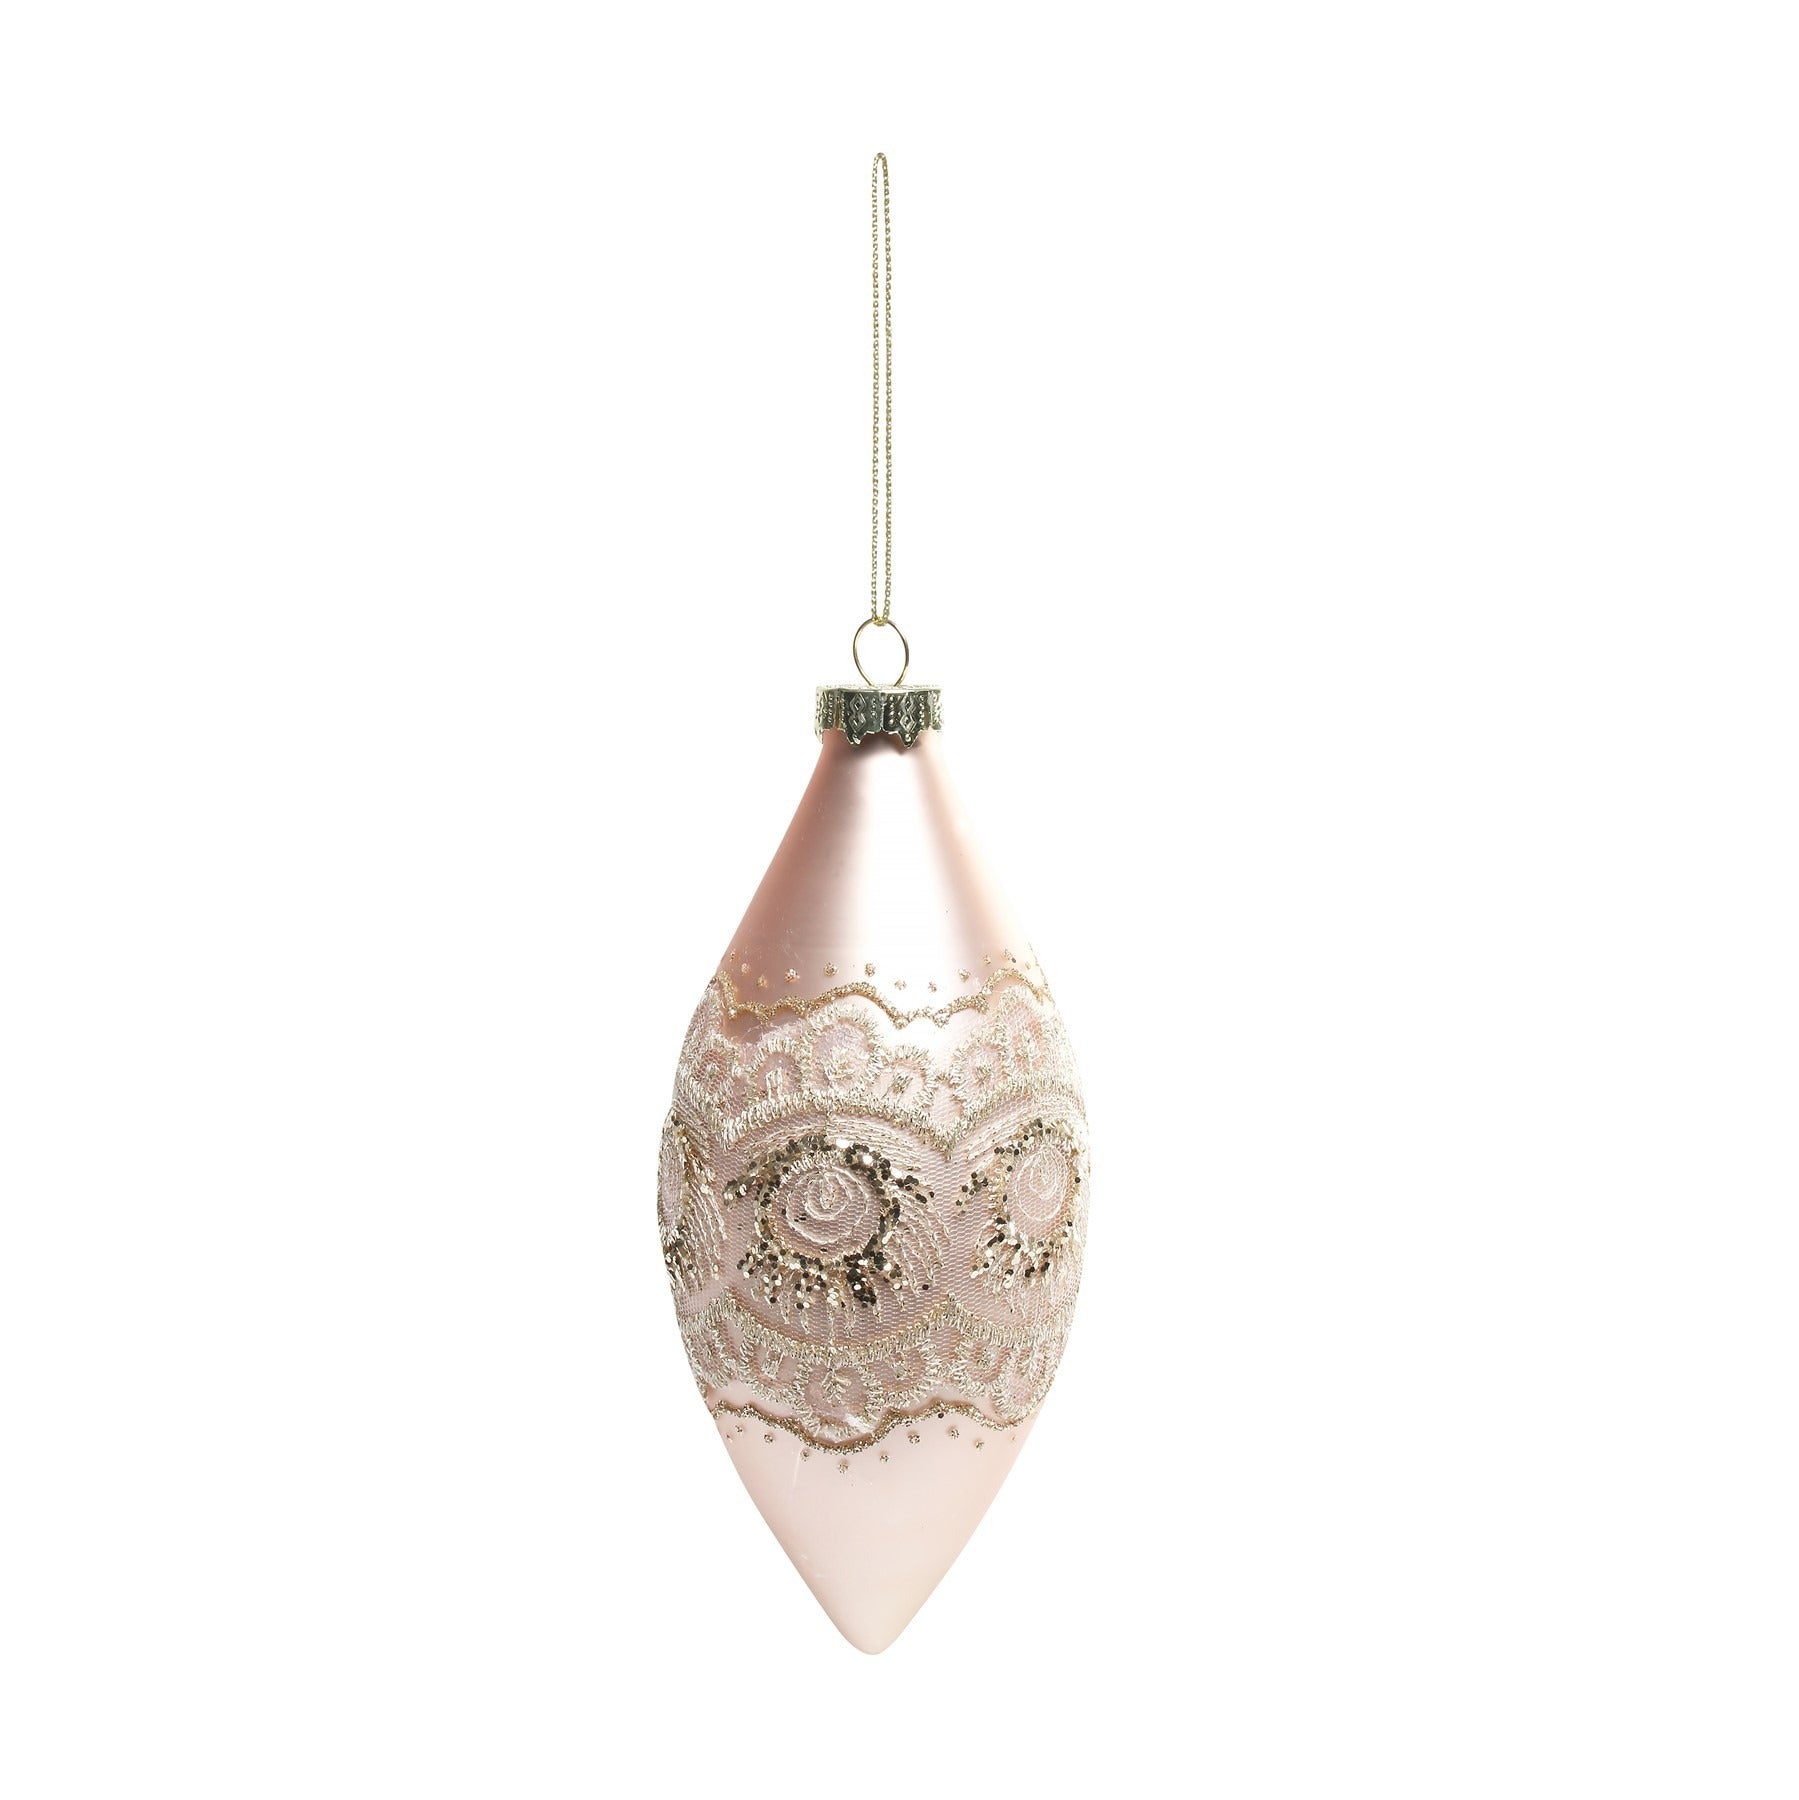 View Pink Glass Droplet Bauble with Lace Detailing H12cm information